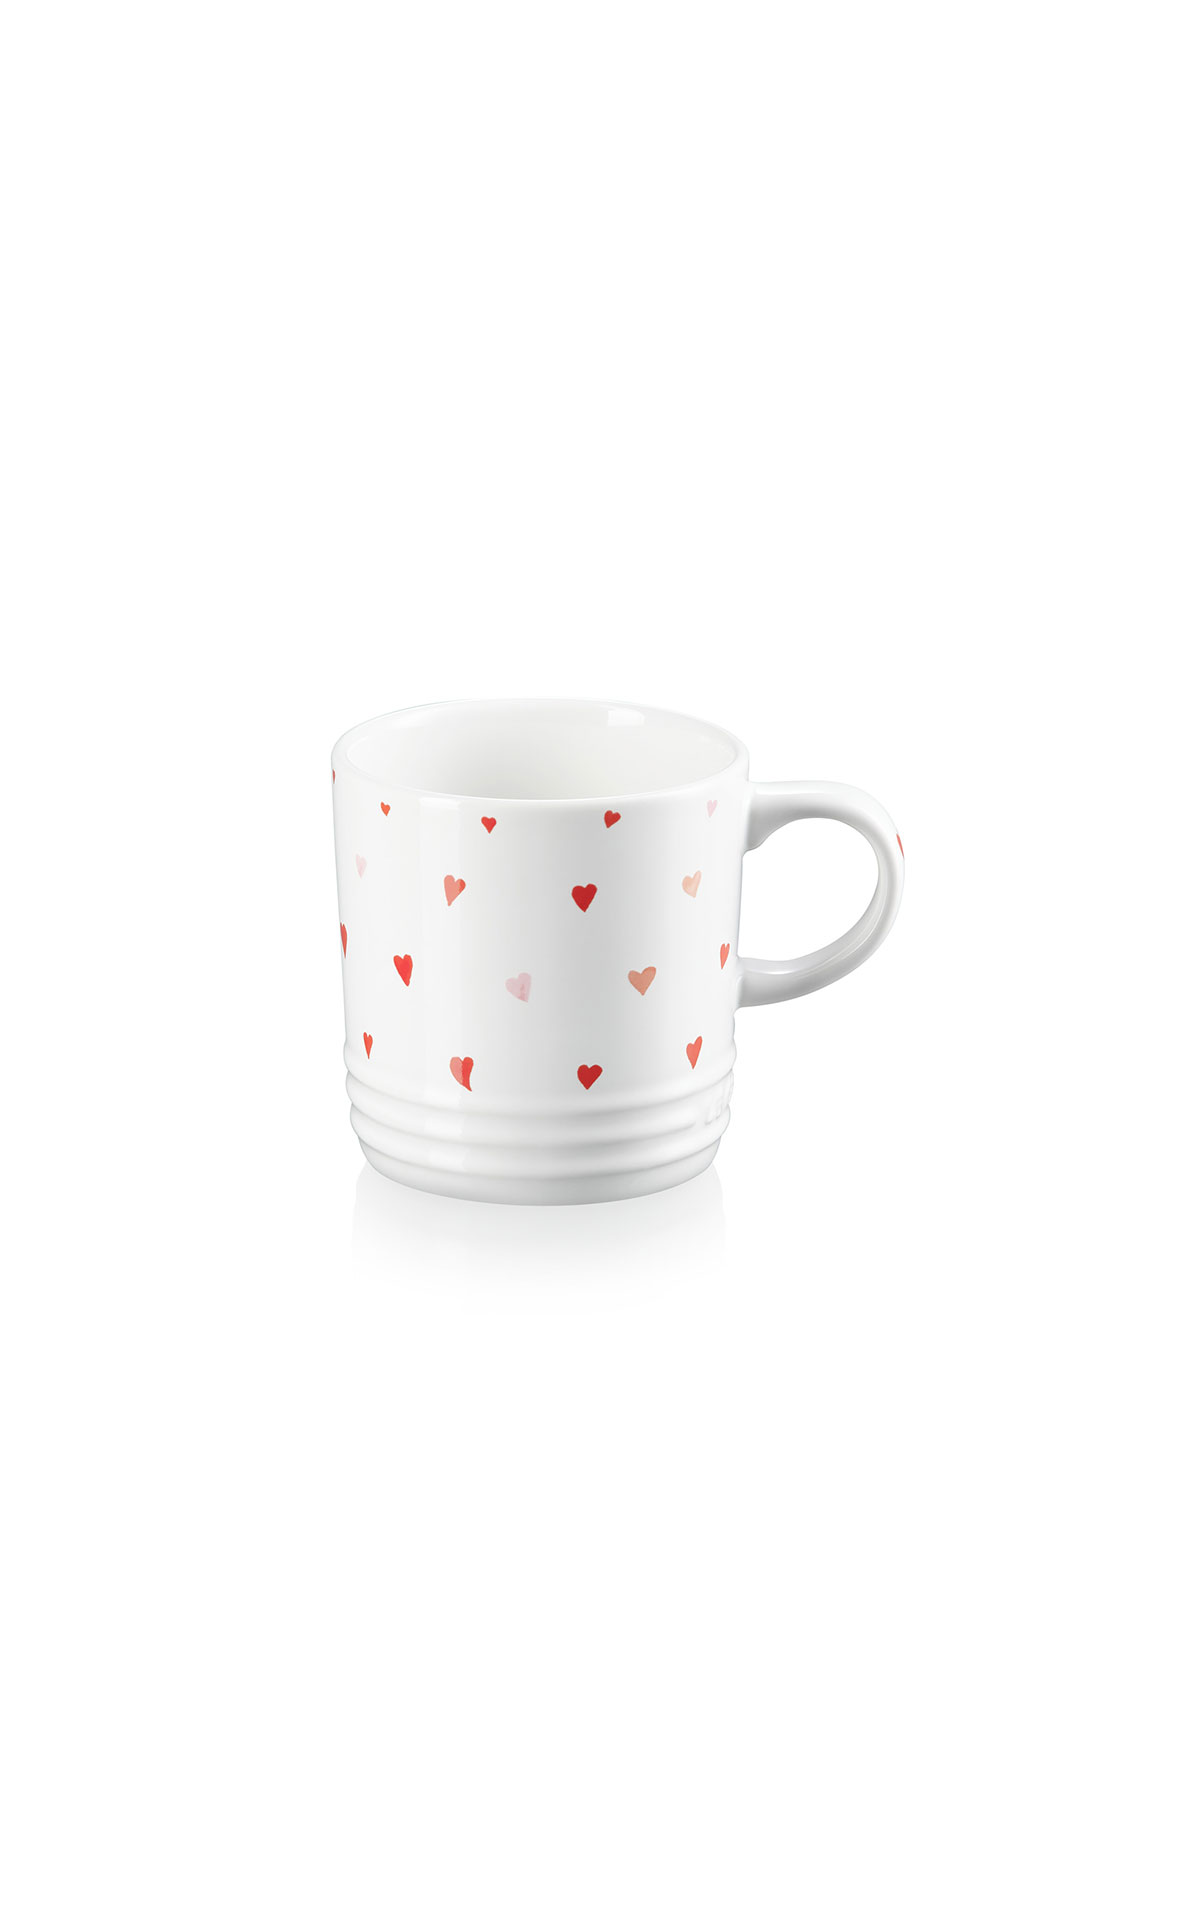 Le Creuset Stoneware heart decal mug white from Bicester Village